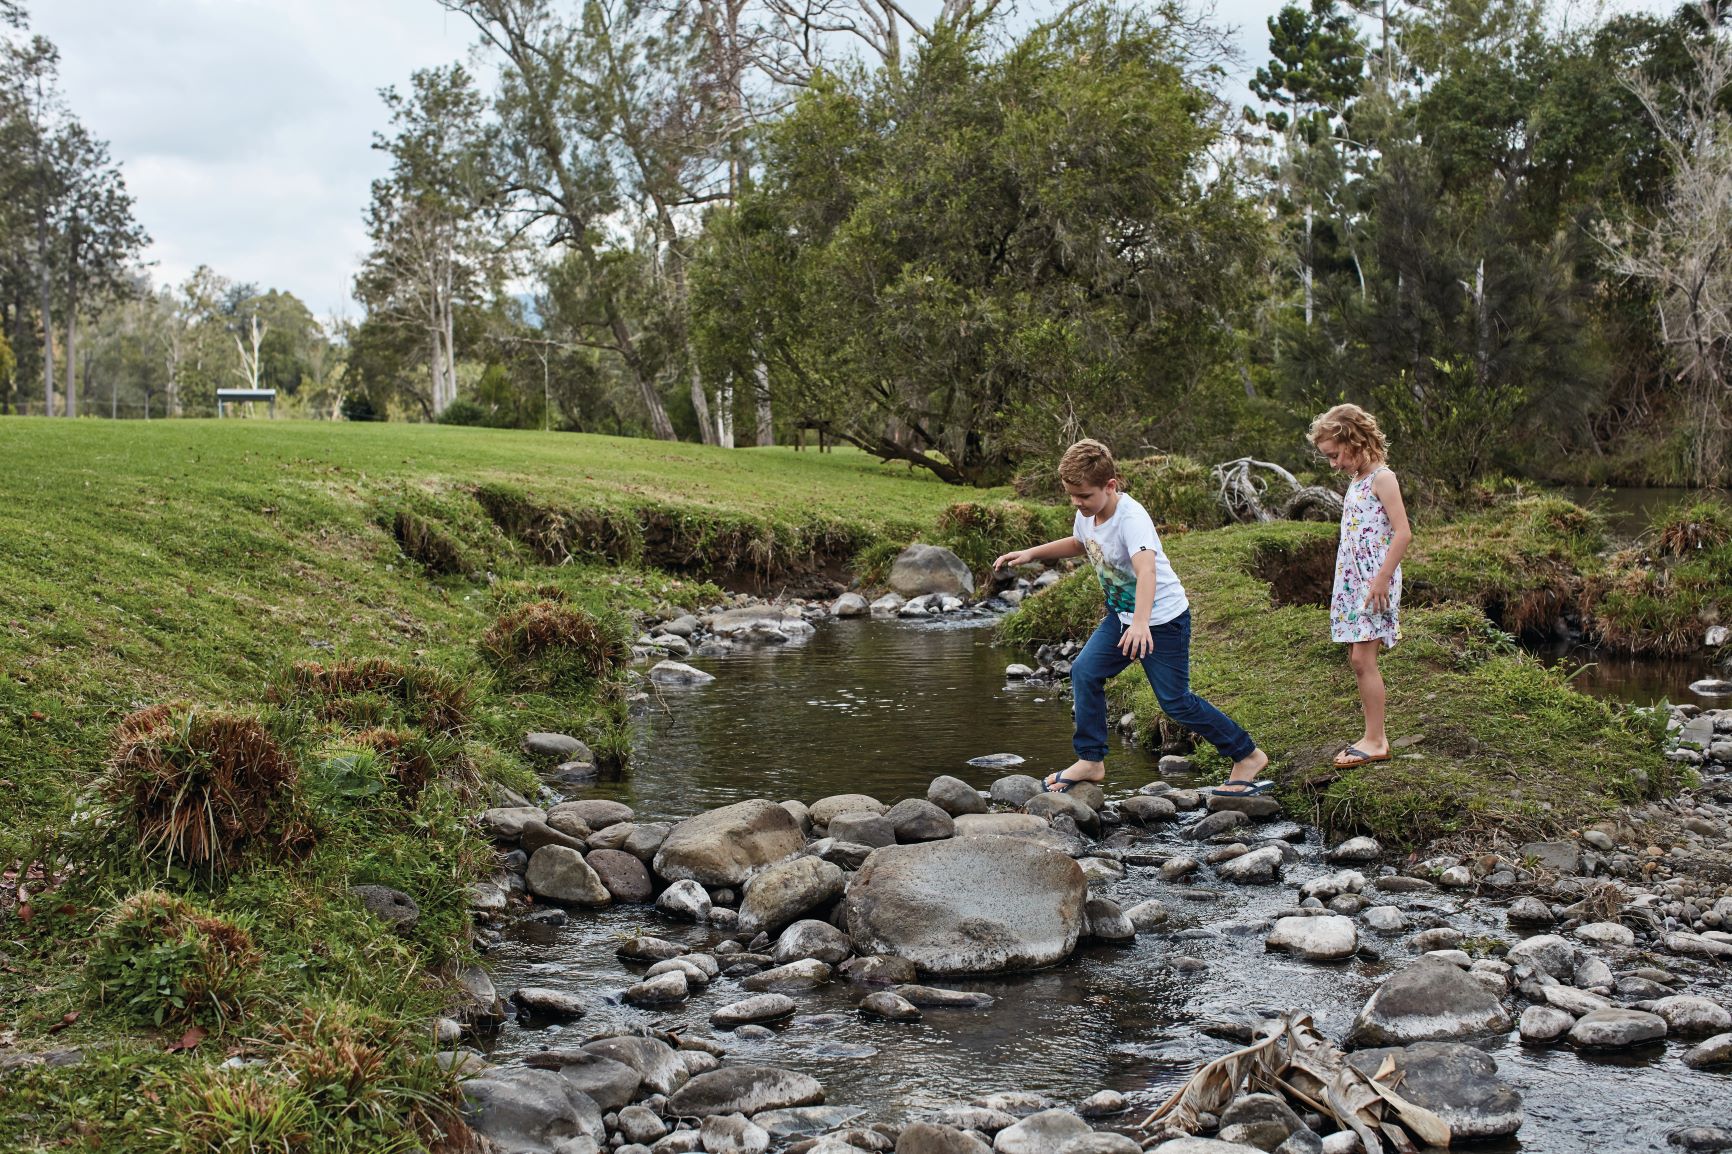 Top 10 things to do in the Gold Coast hinterland during the September school holidays